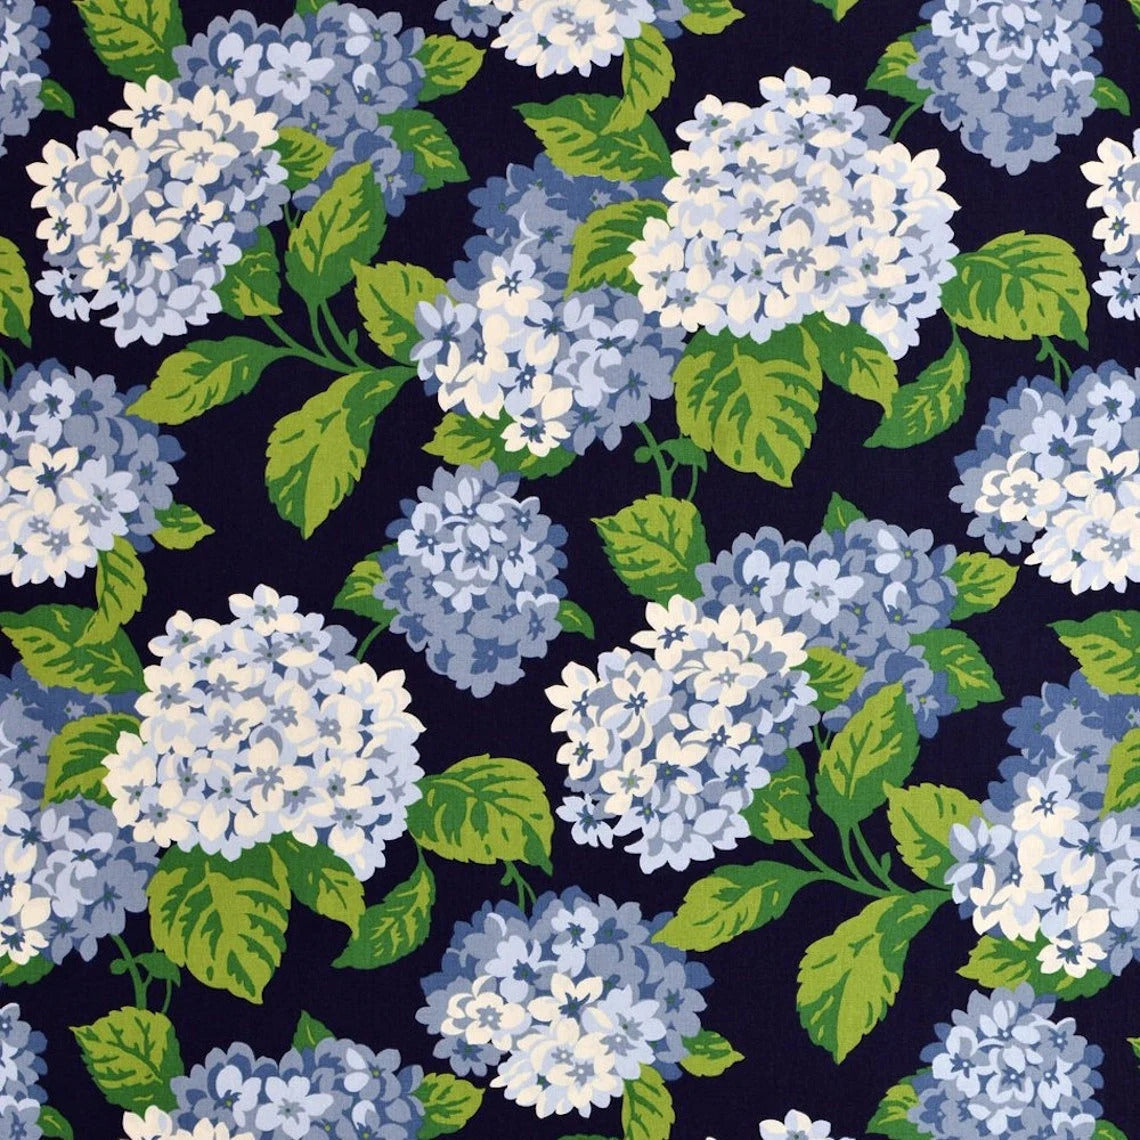 decorative pillows in summerwind navy blue hydrangea floral, large scale